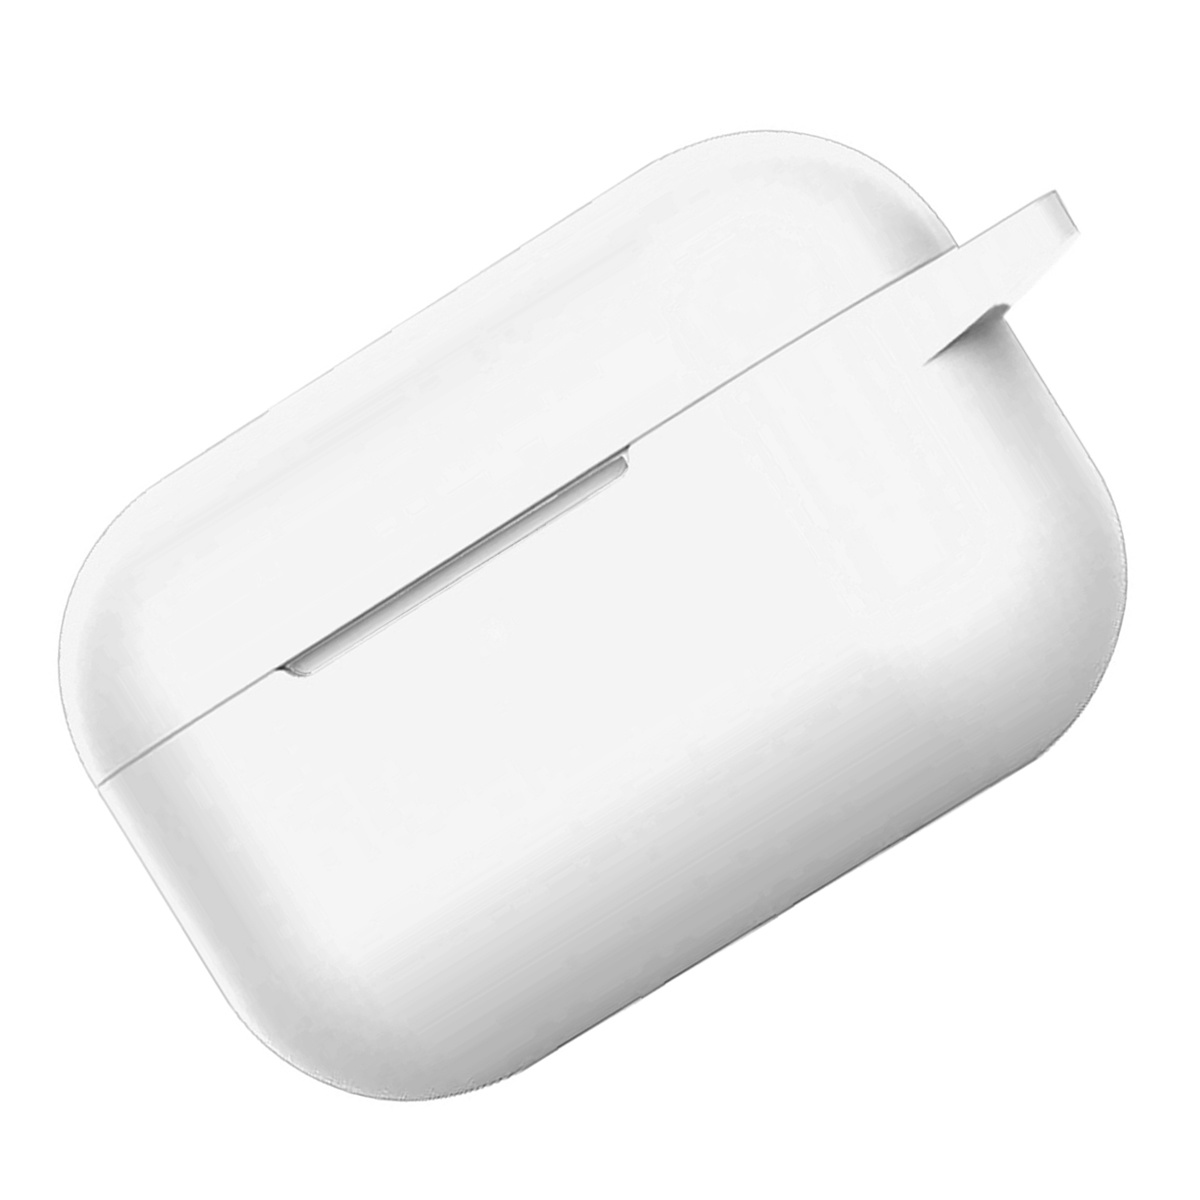 NoXx Hoes Geschikt voor Airpods Pro Hoesje Cover Silicone Case Hoes - Transparant